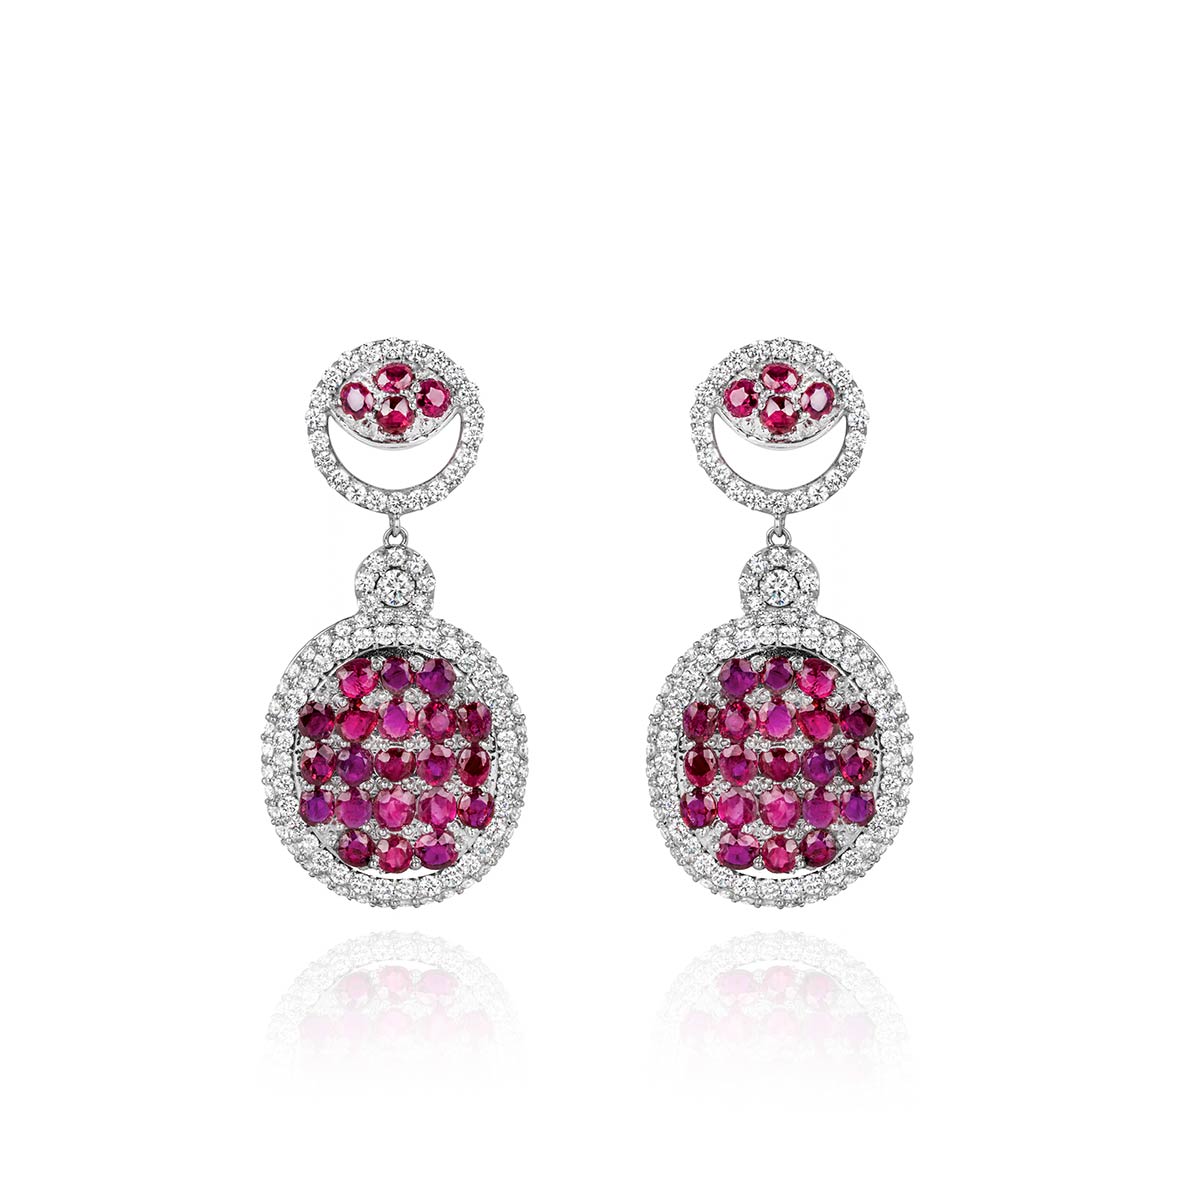 White Gold Diamond And Ruby Earrings